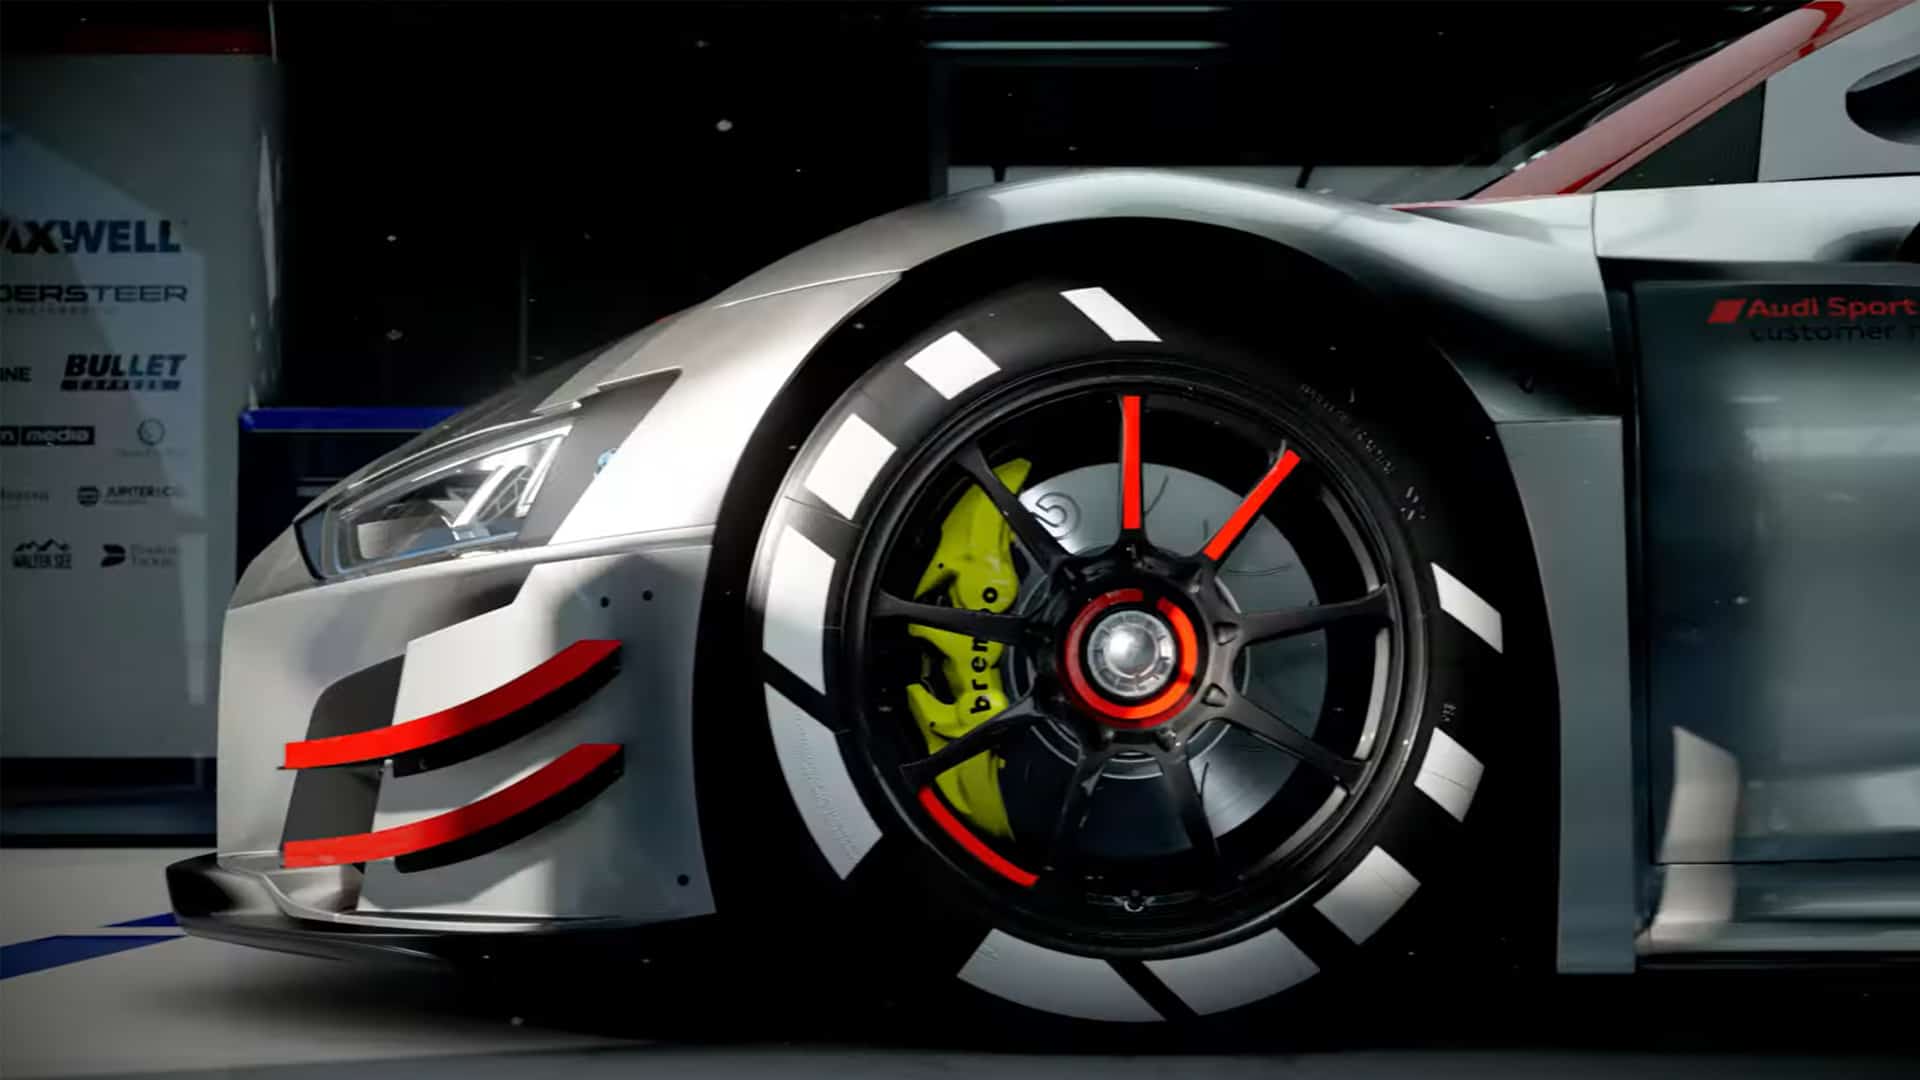 Audi R8 LMS GT3 evo II and Ford Mustang Shelby GT350R coming to Gran Turismo 7